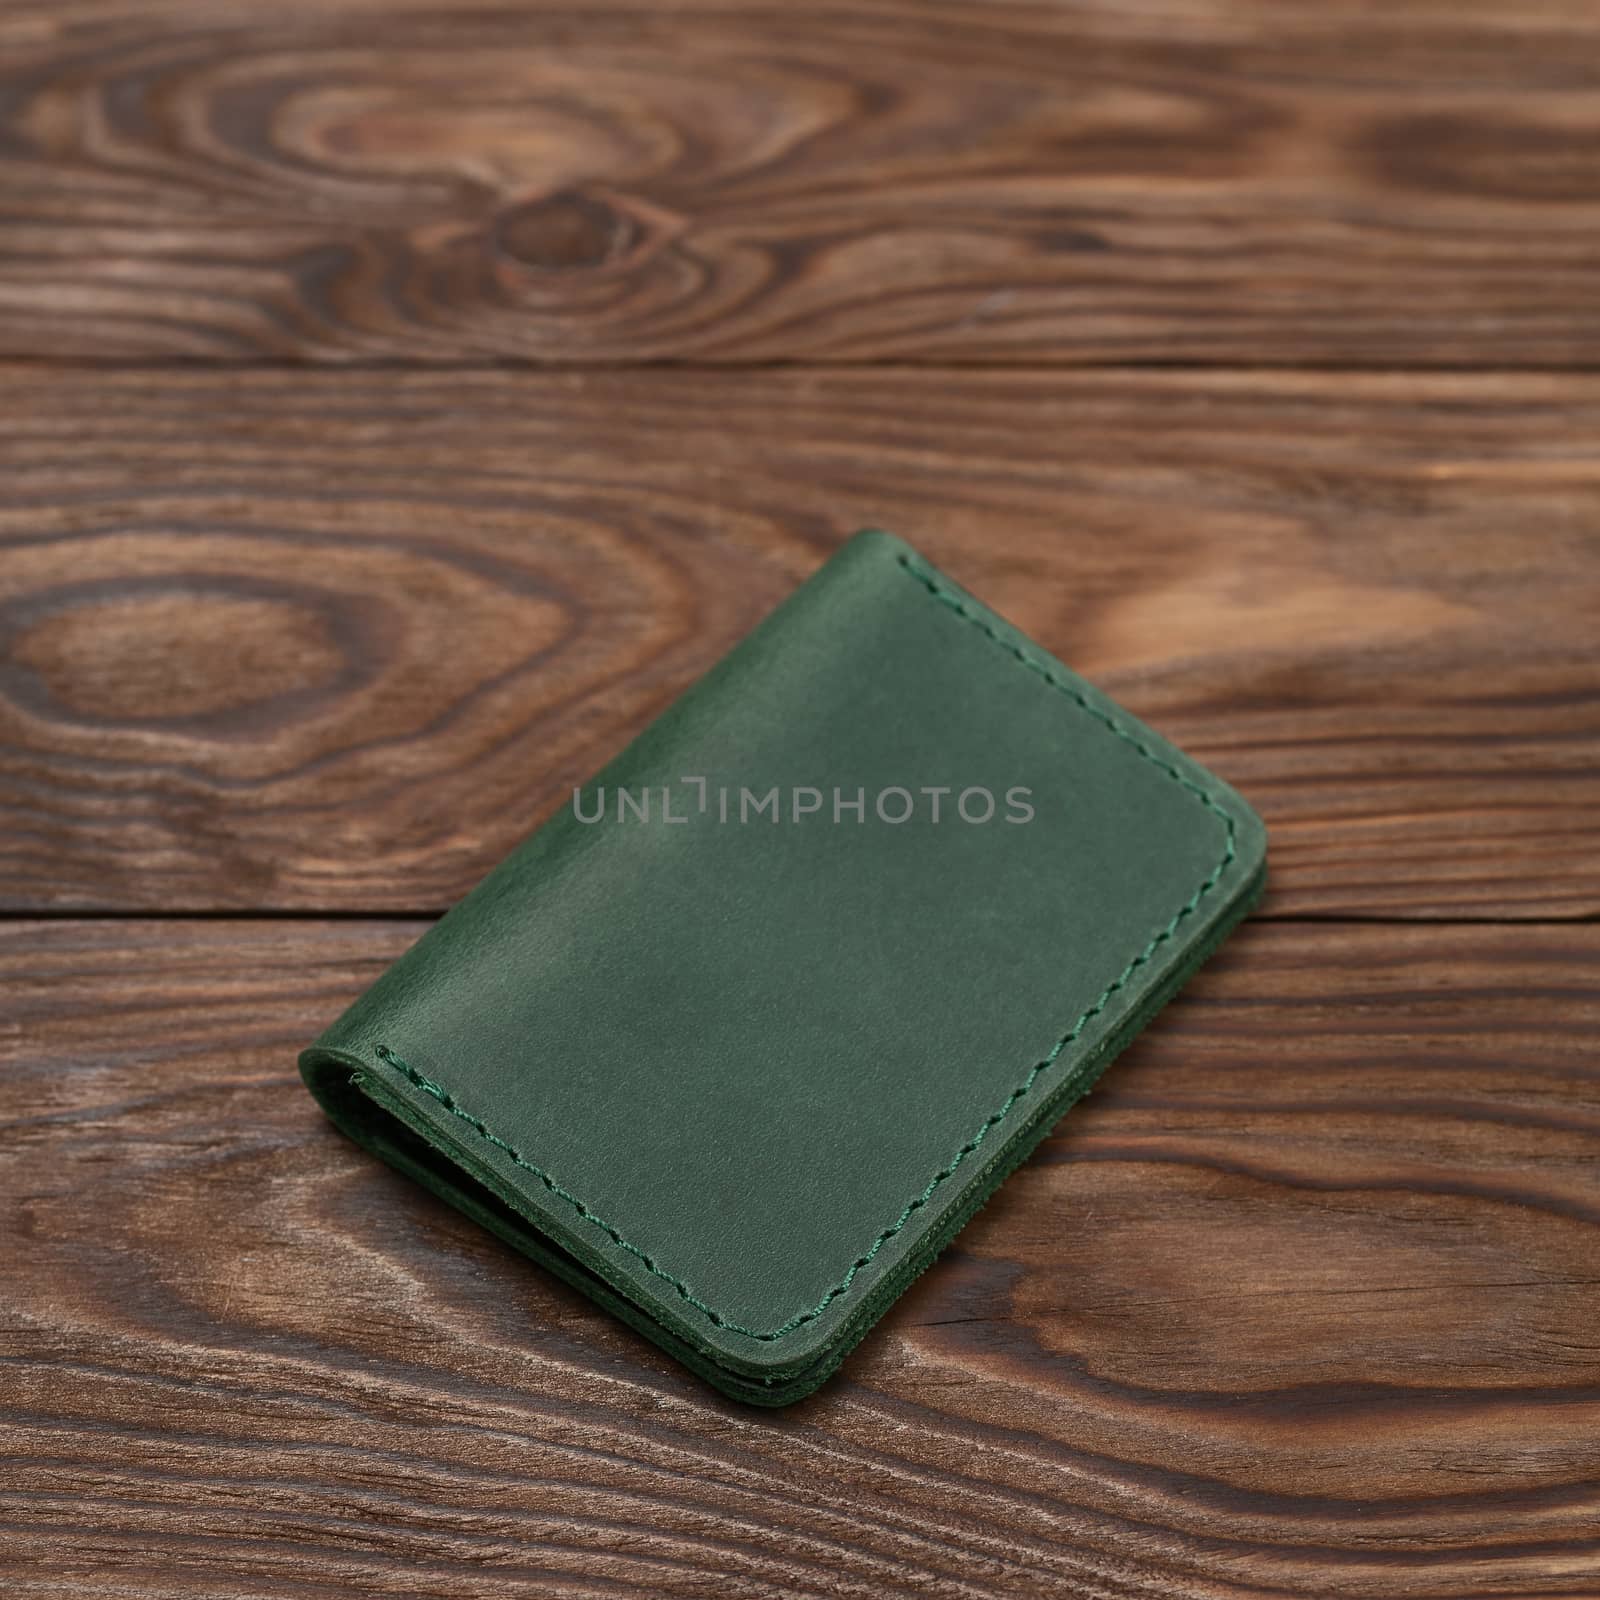 Green two-pocket closed leather handmade cardholder lies on wooden background. Soft focus on background. Stock photo on blurred background. by alexsdriver